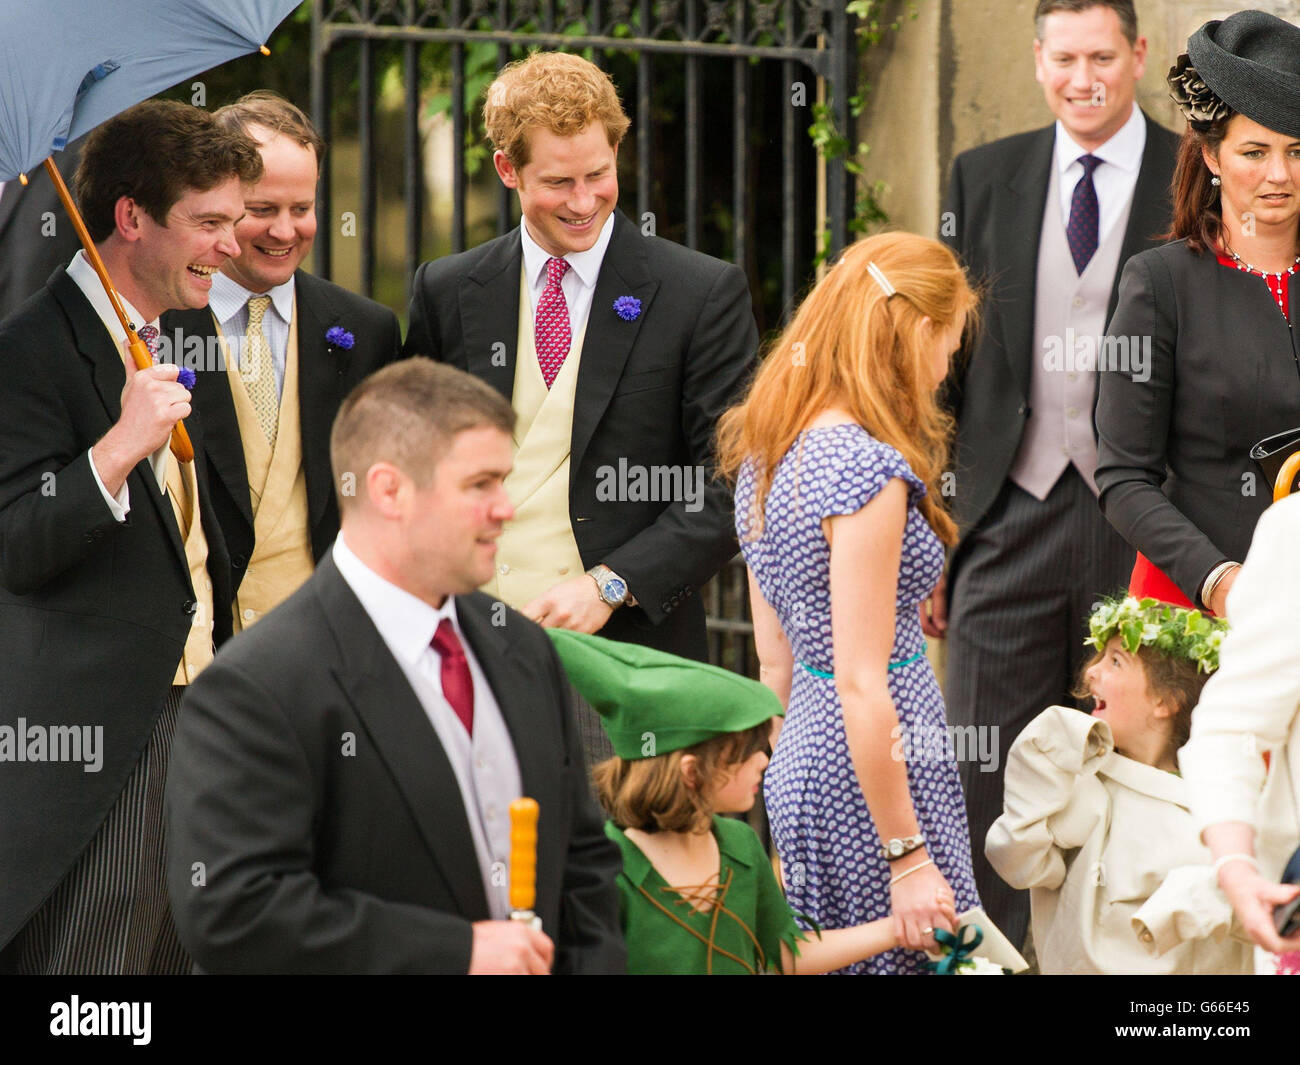 Prince Harry at the wedding of Lady Melissa Percy to Thomas van Straubenzee  at St Michael's Parish Church in Alnwick Stock Photo - Alamy